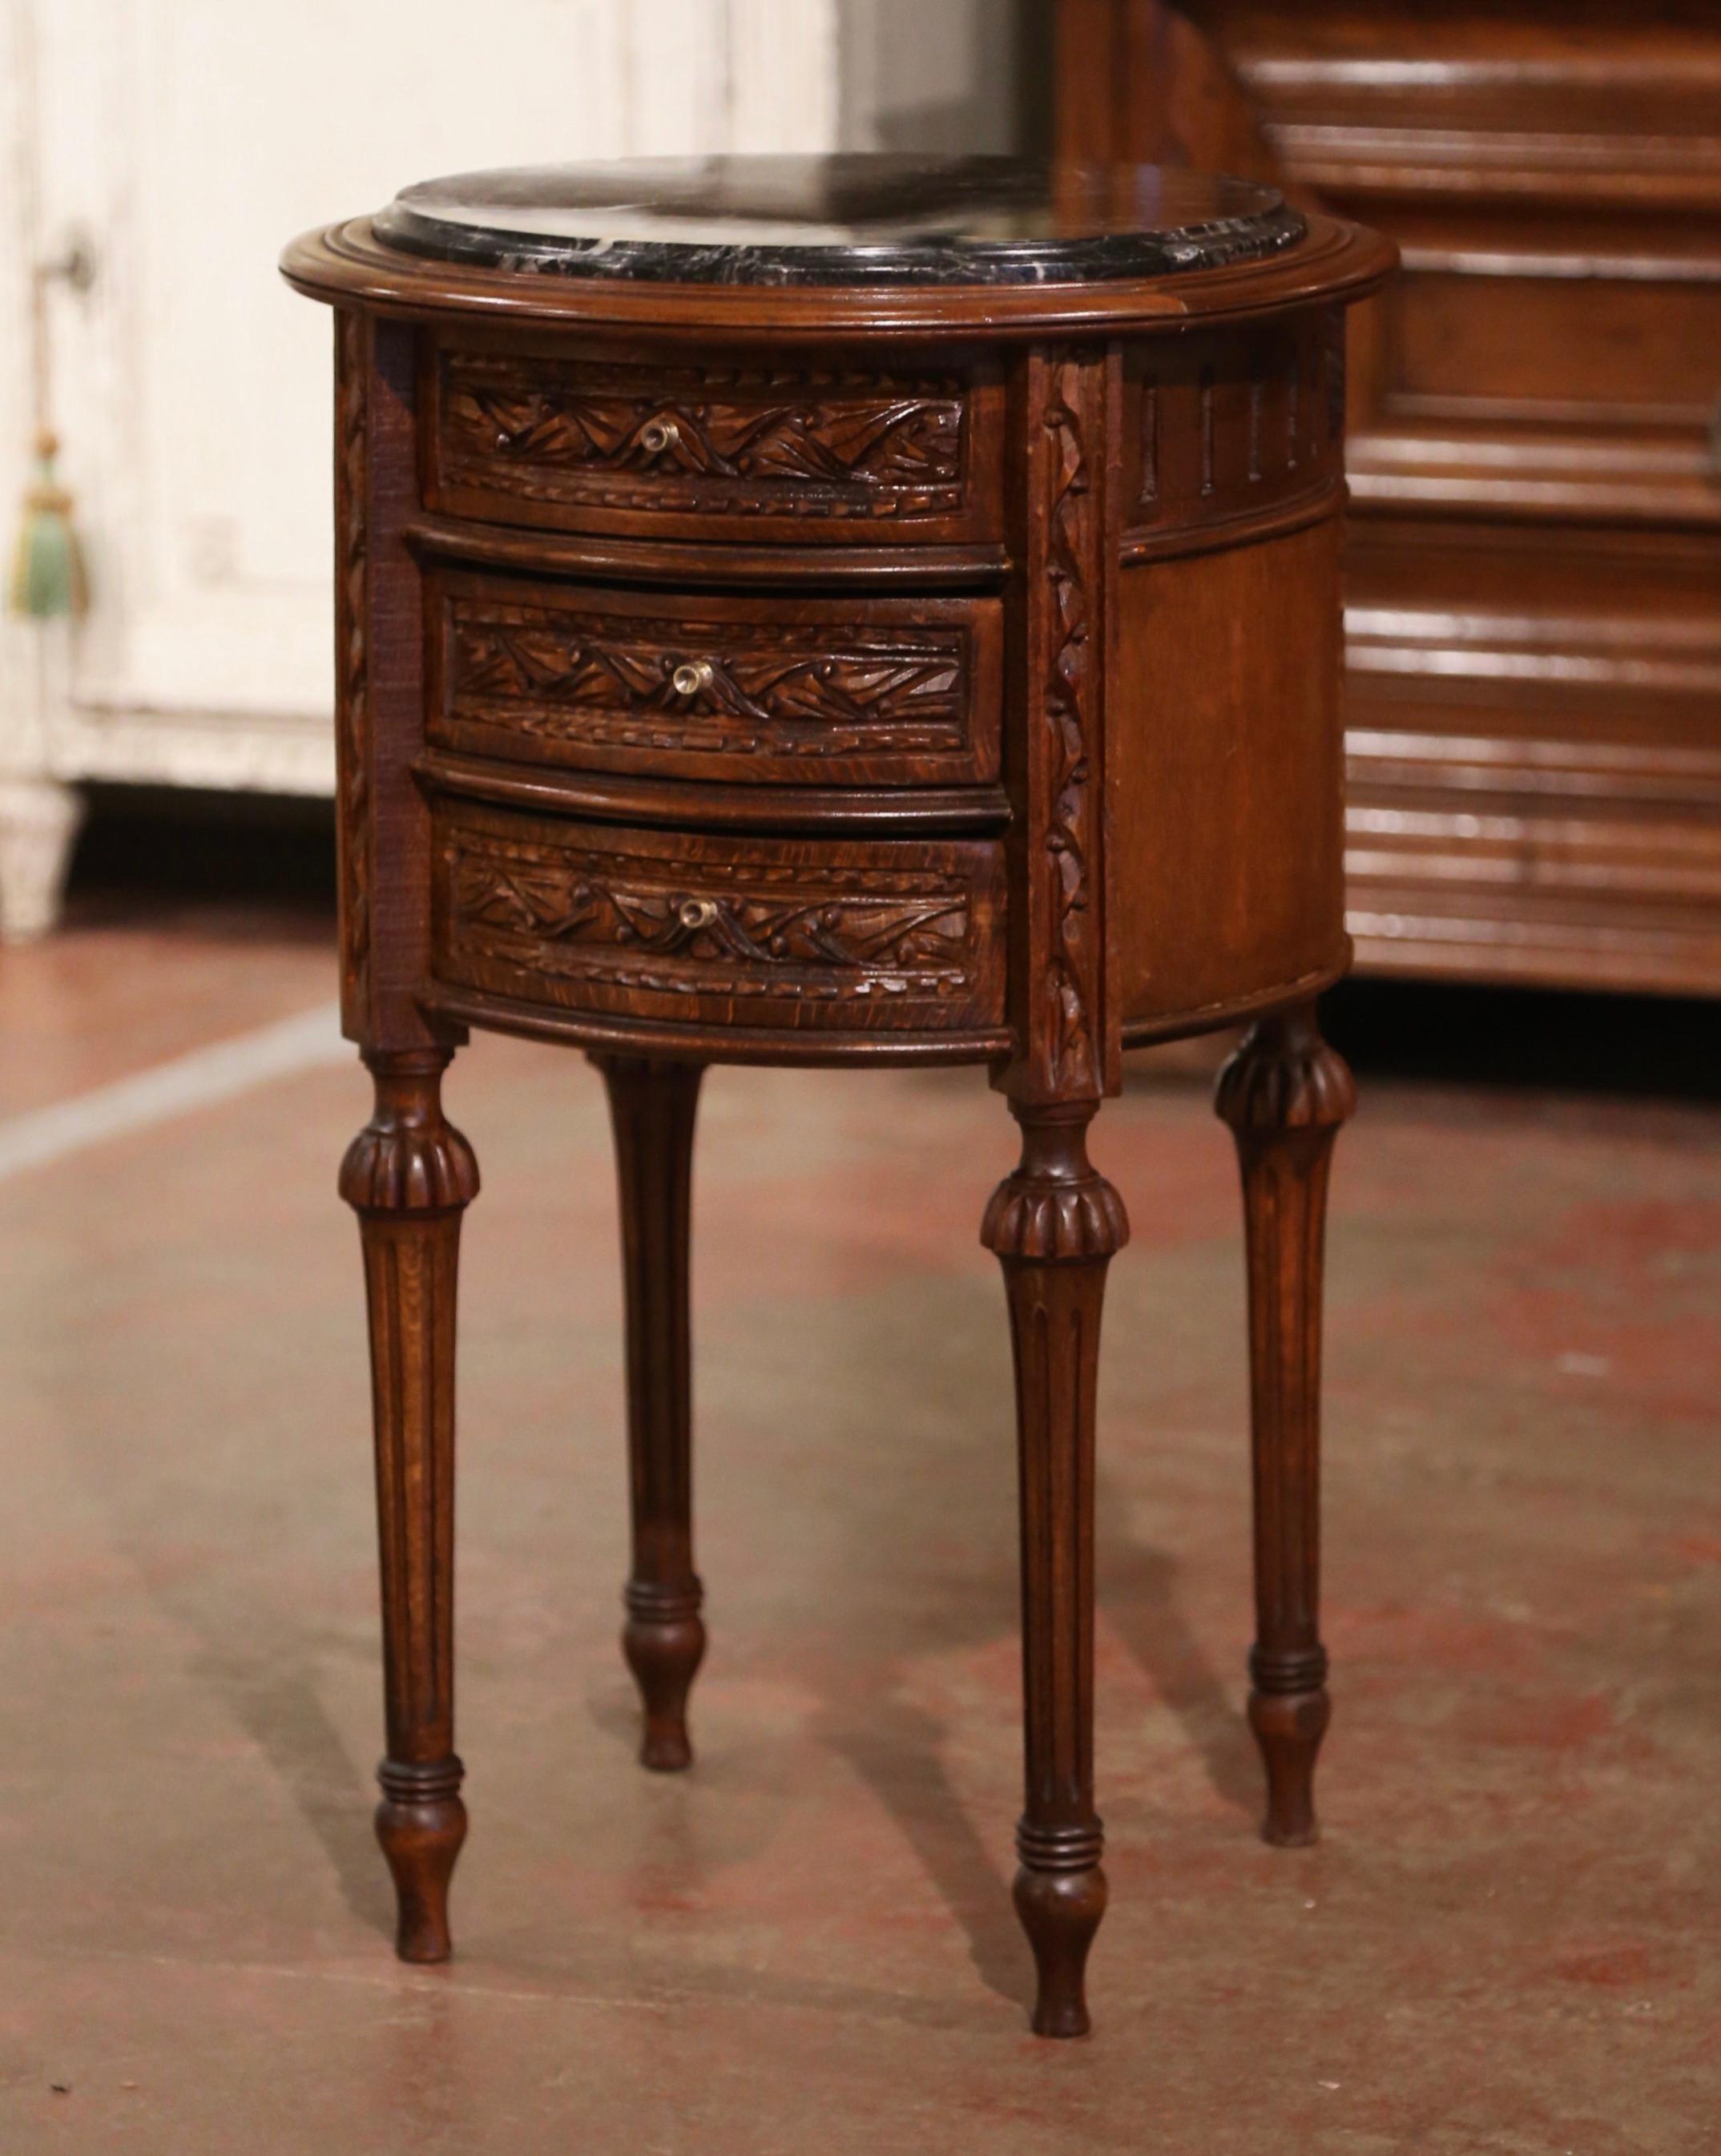 This elegant antique side table was created in France circa 1960. Built of walnut and round in shape, the table stands on tapered fluted legs ending with turned feet. The petite table features three carved drawers decorated with brass knobs. The